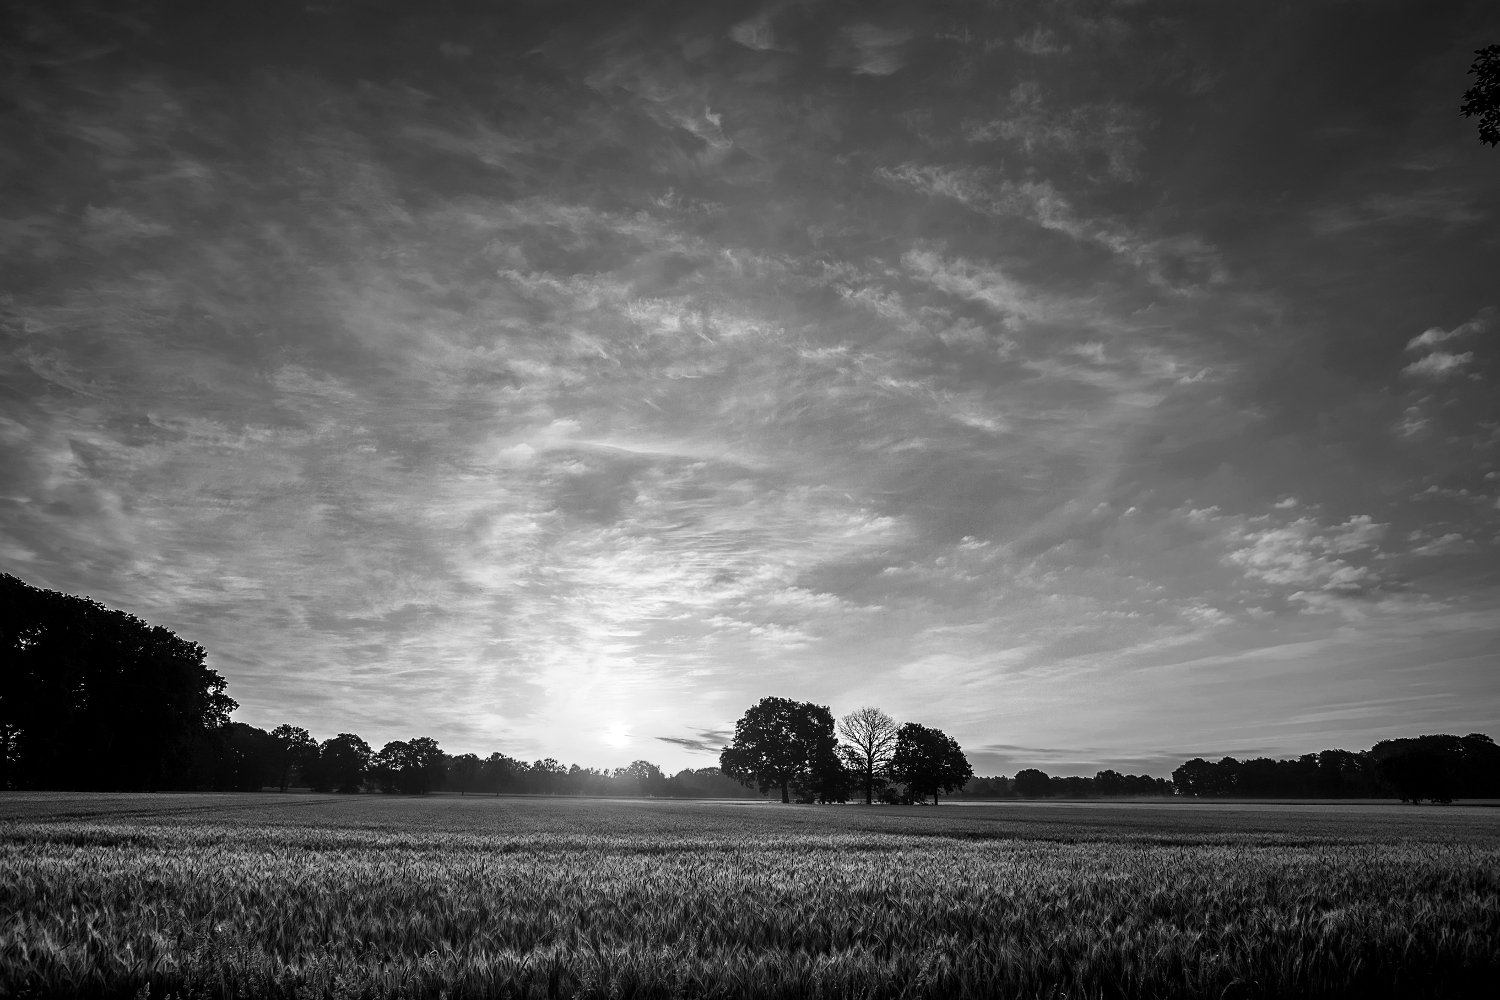 IMG_9486-HDR_Canon EOS 6D_1-2000 Sek. bei f - 7,1_24 mm_ISO 100-g4-2-bw4-2-gk